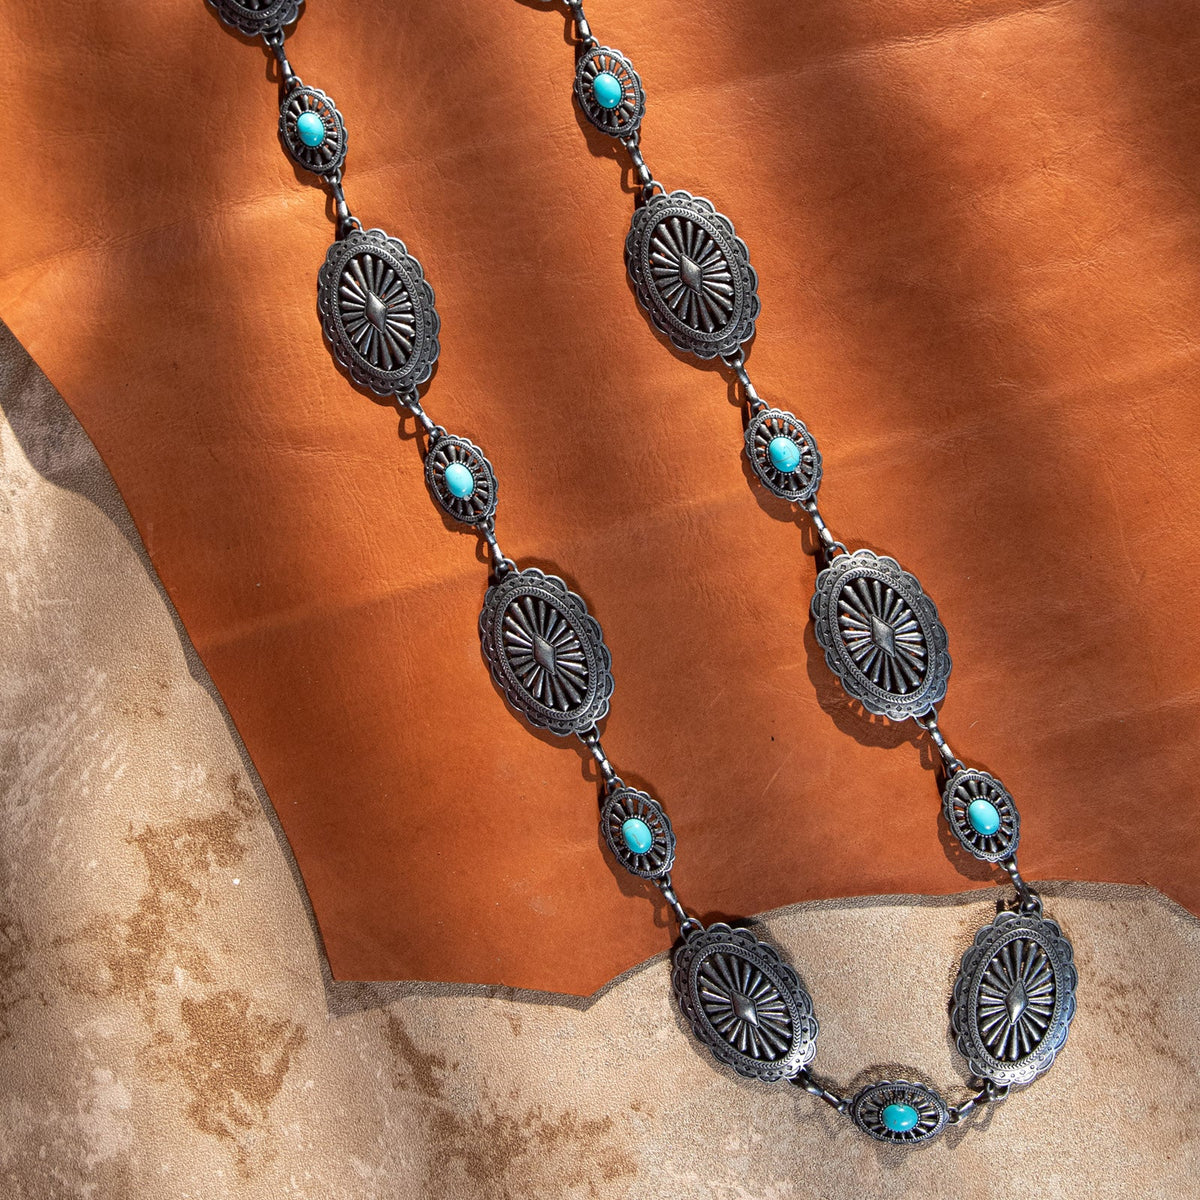 Rustic Couture Western Oval Stone Concho Link Chain Belt - Montana West World